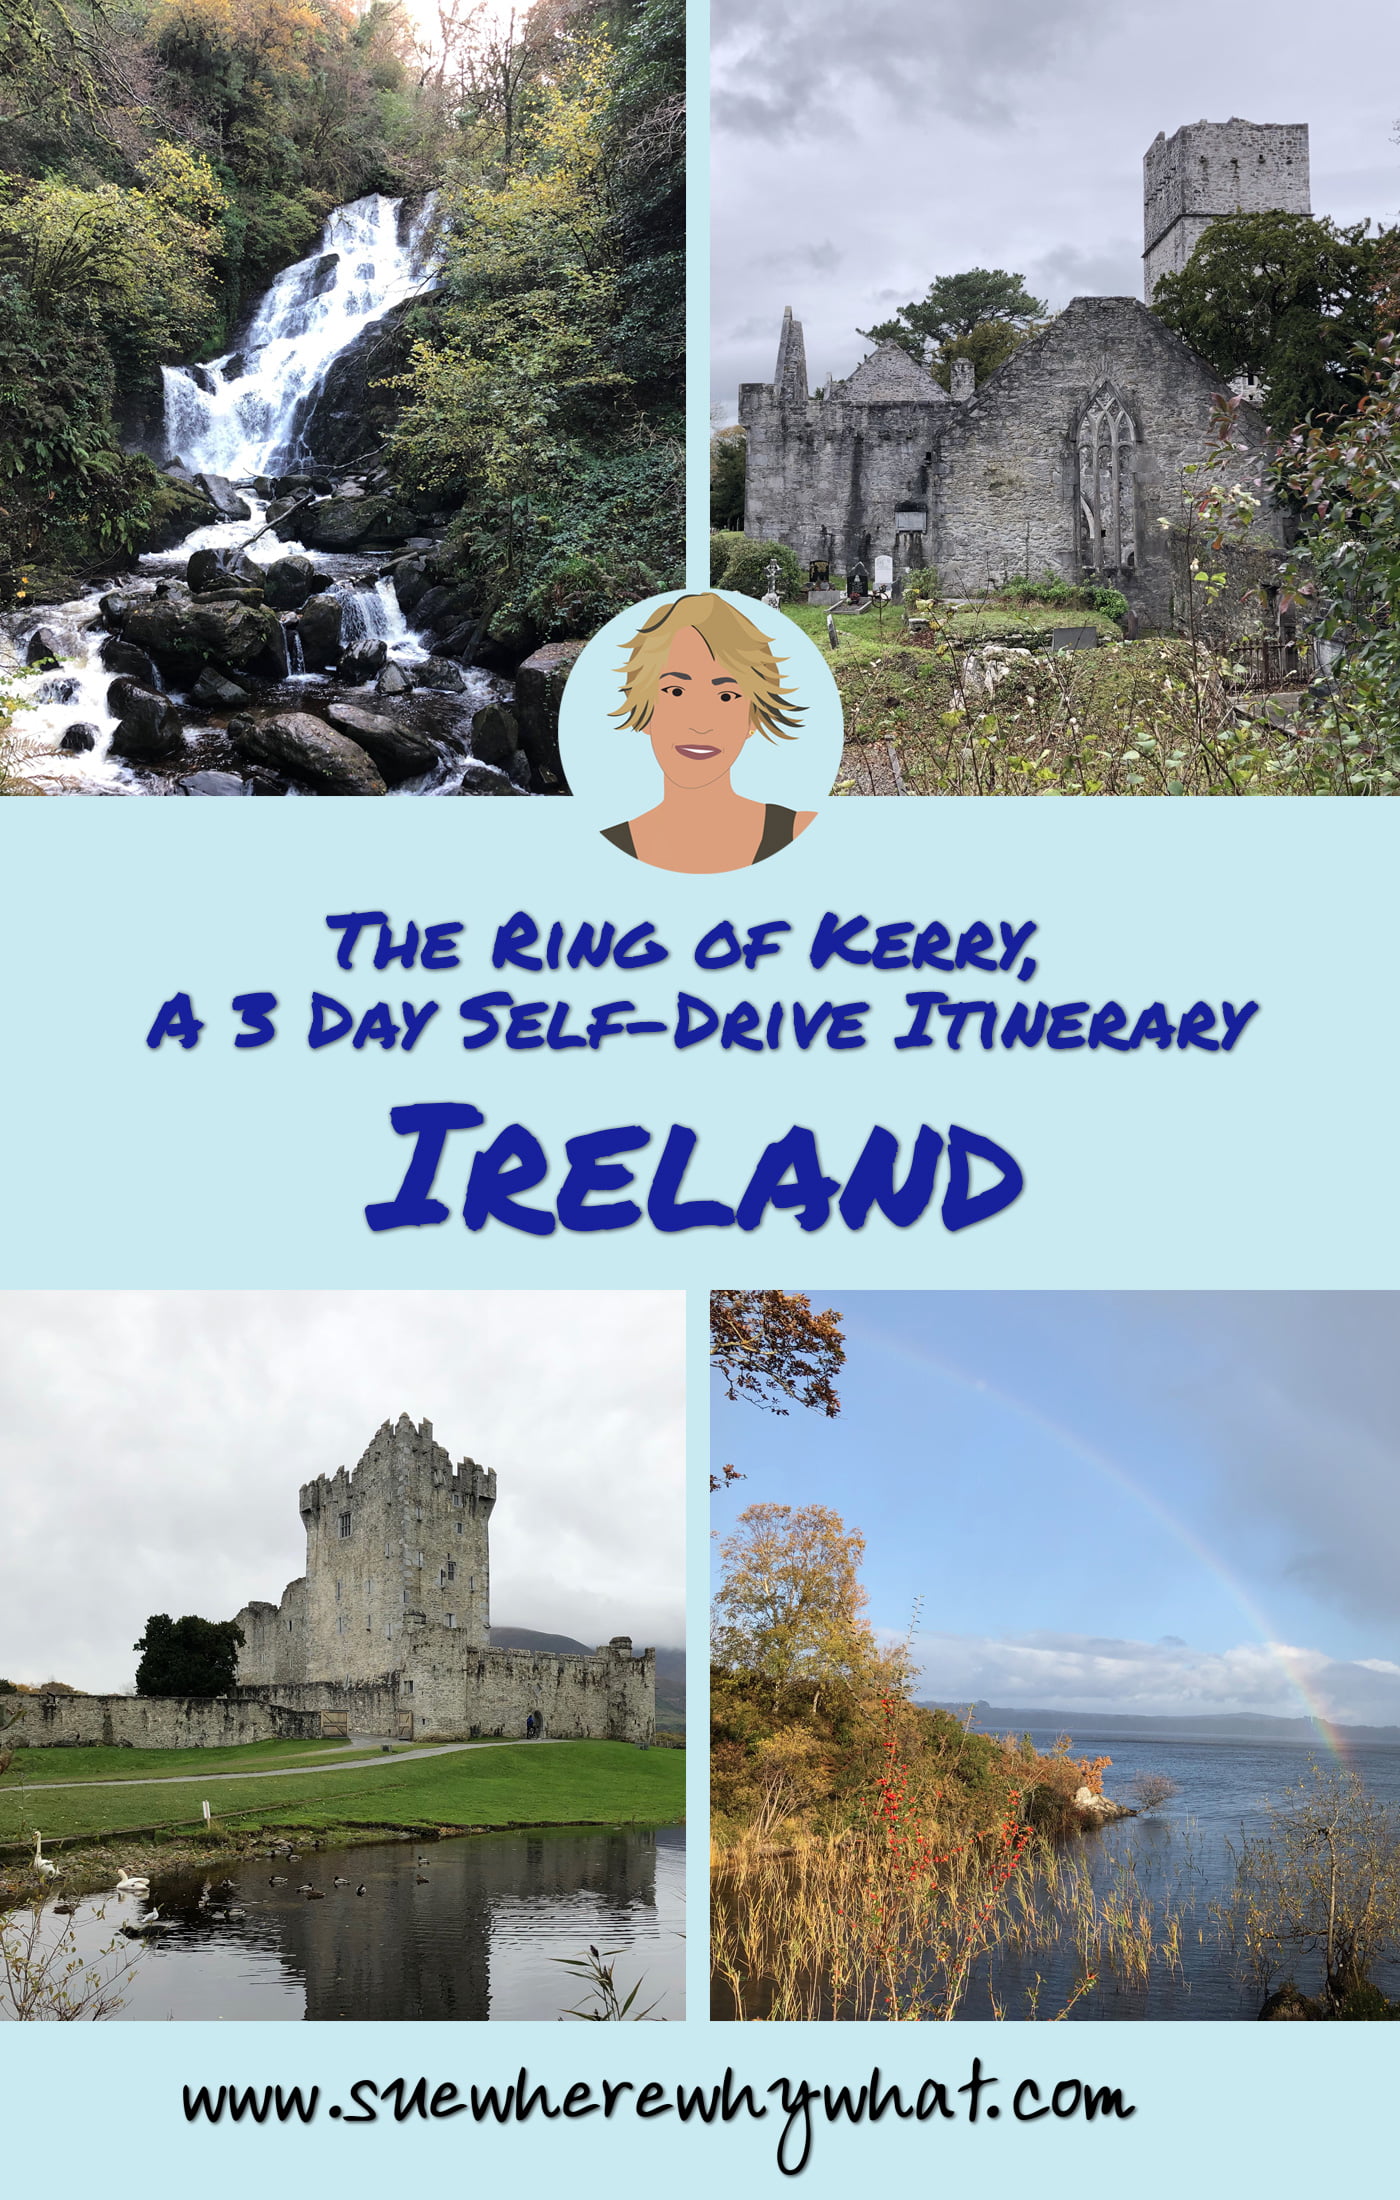 The Ring of Kerry, A 3 Day Self-Drive Itinerary